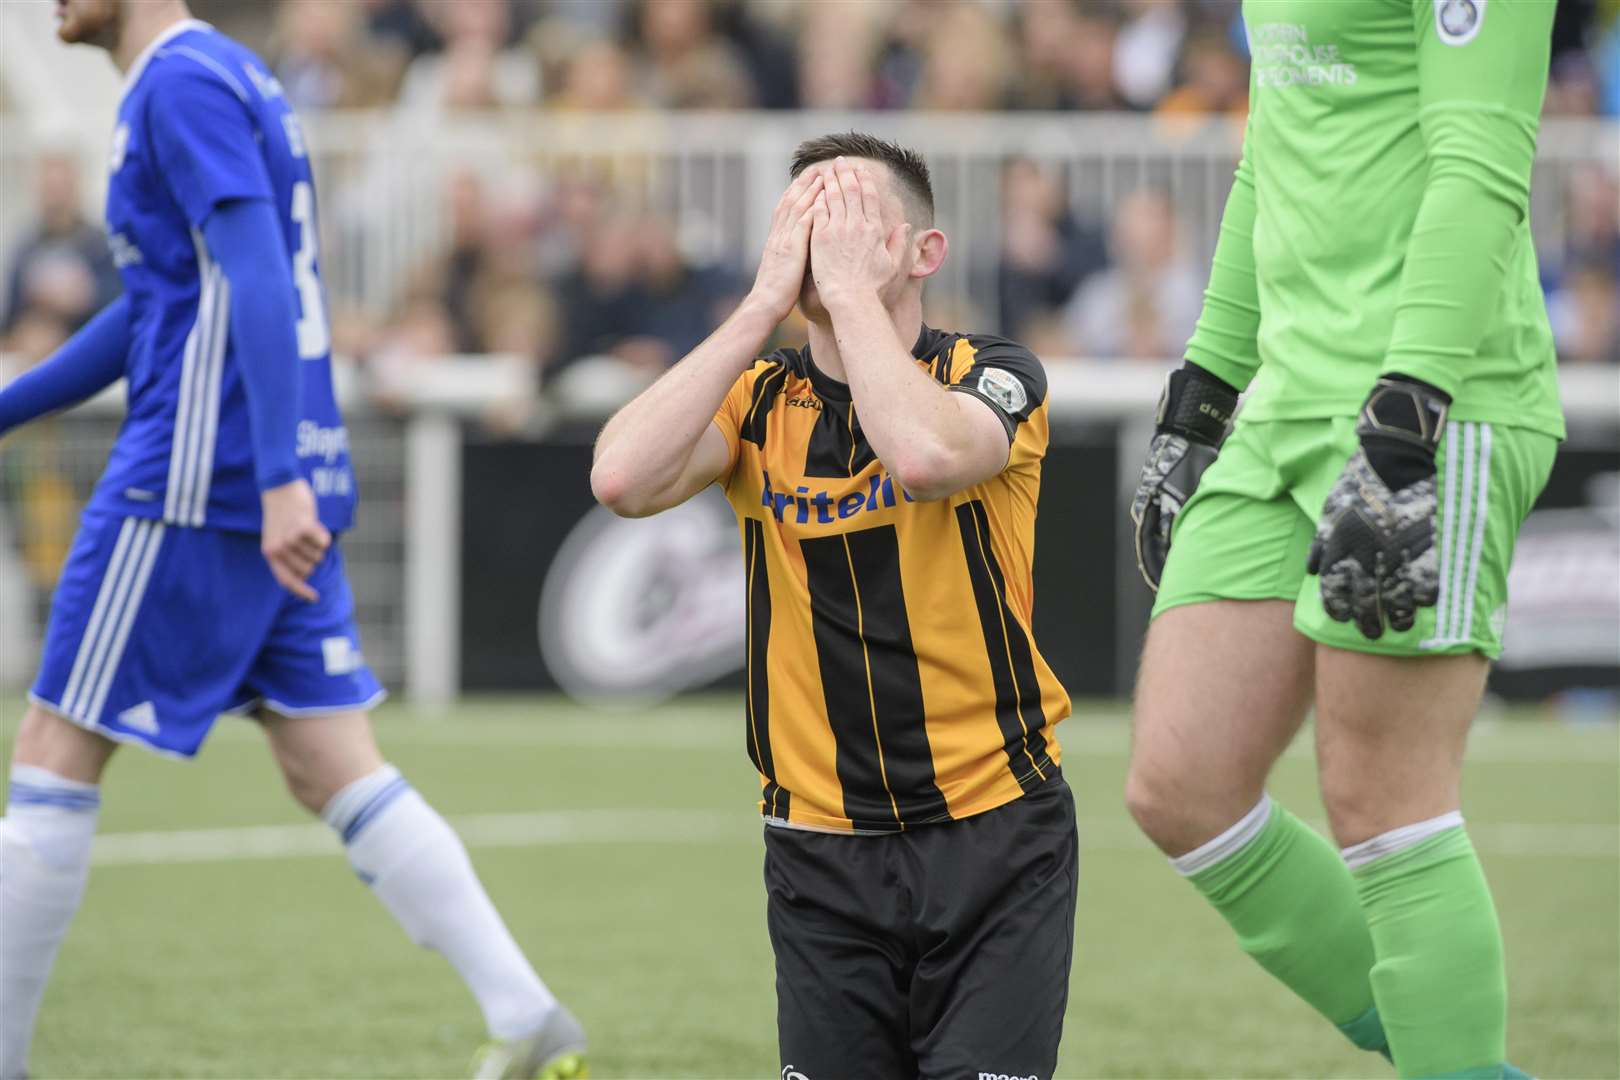 Tom Wraight reacts to a missed chance in the final moments Picture: Andy Payton